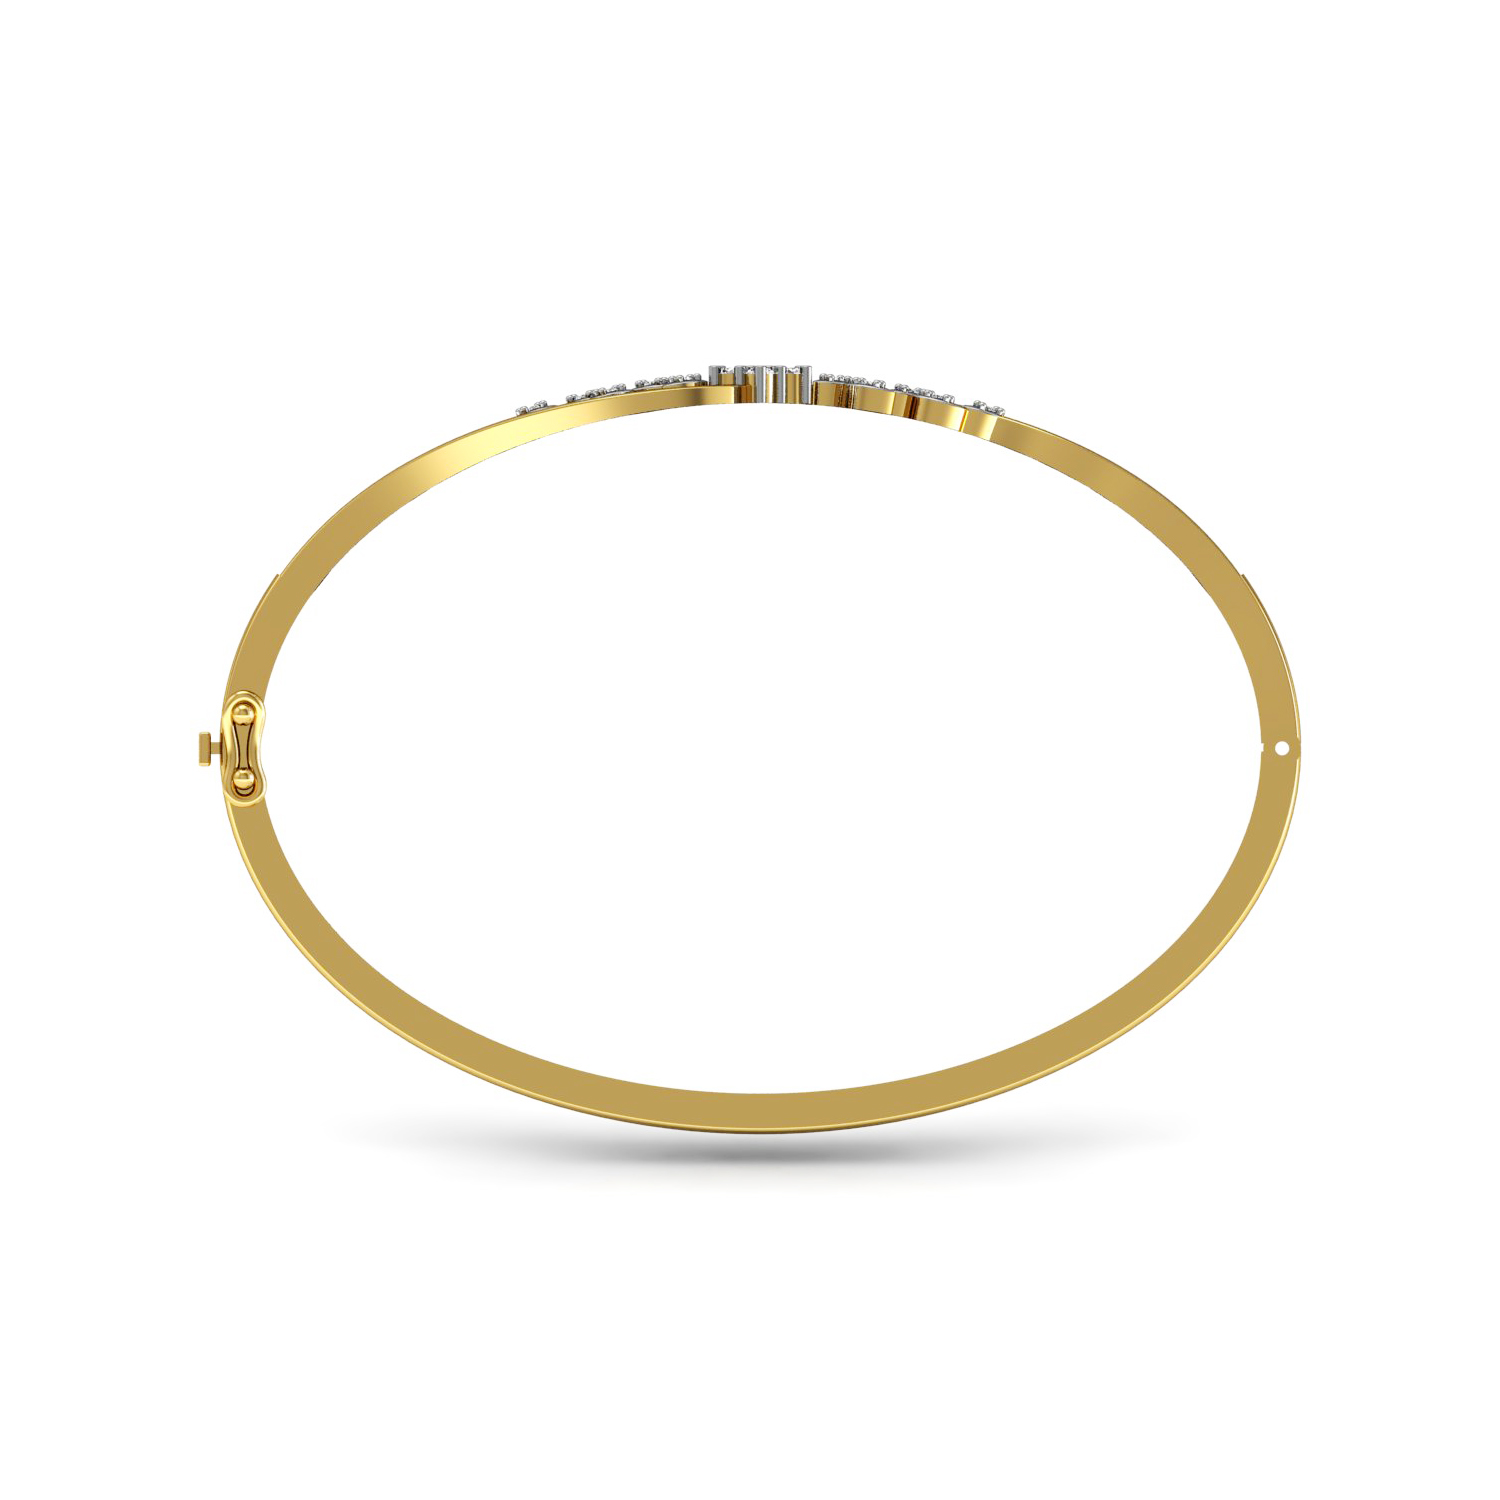 Solid gold openable bracelet with real diamond